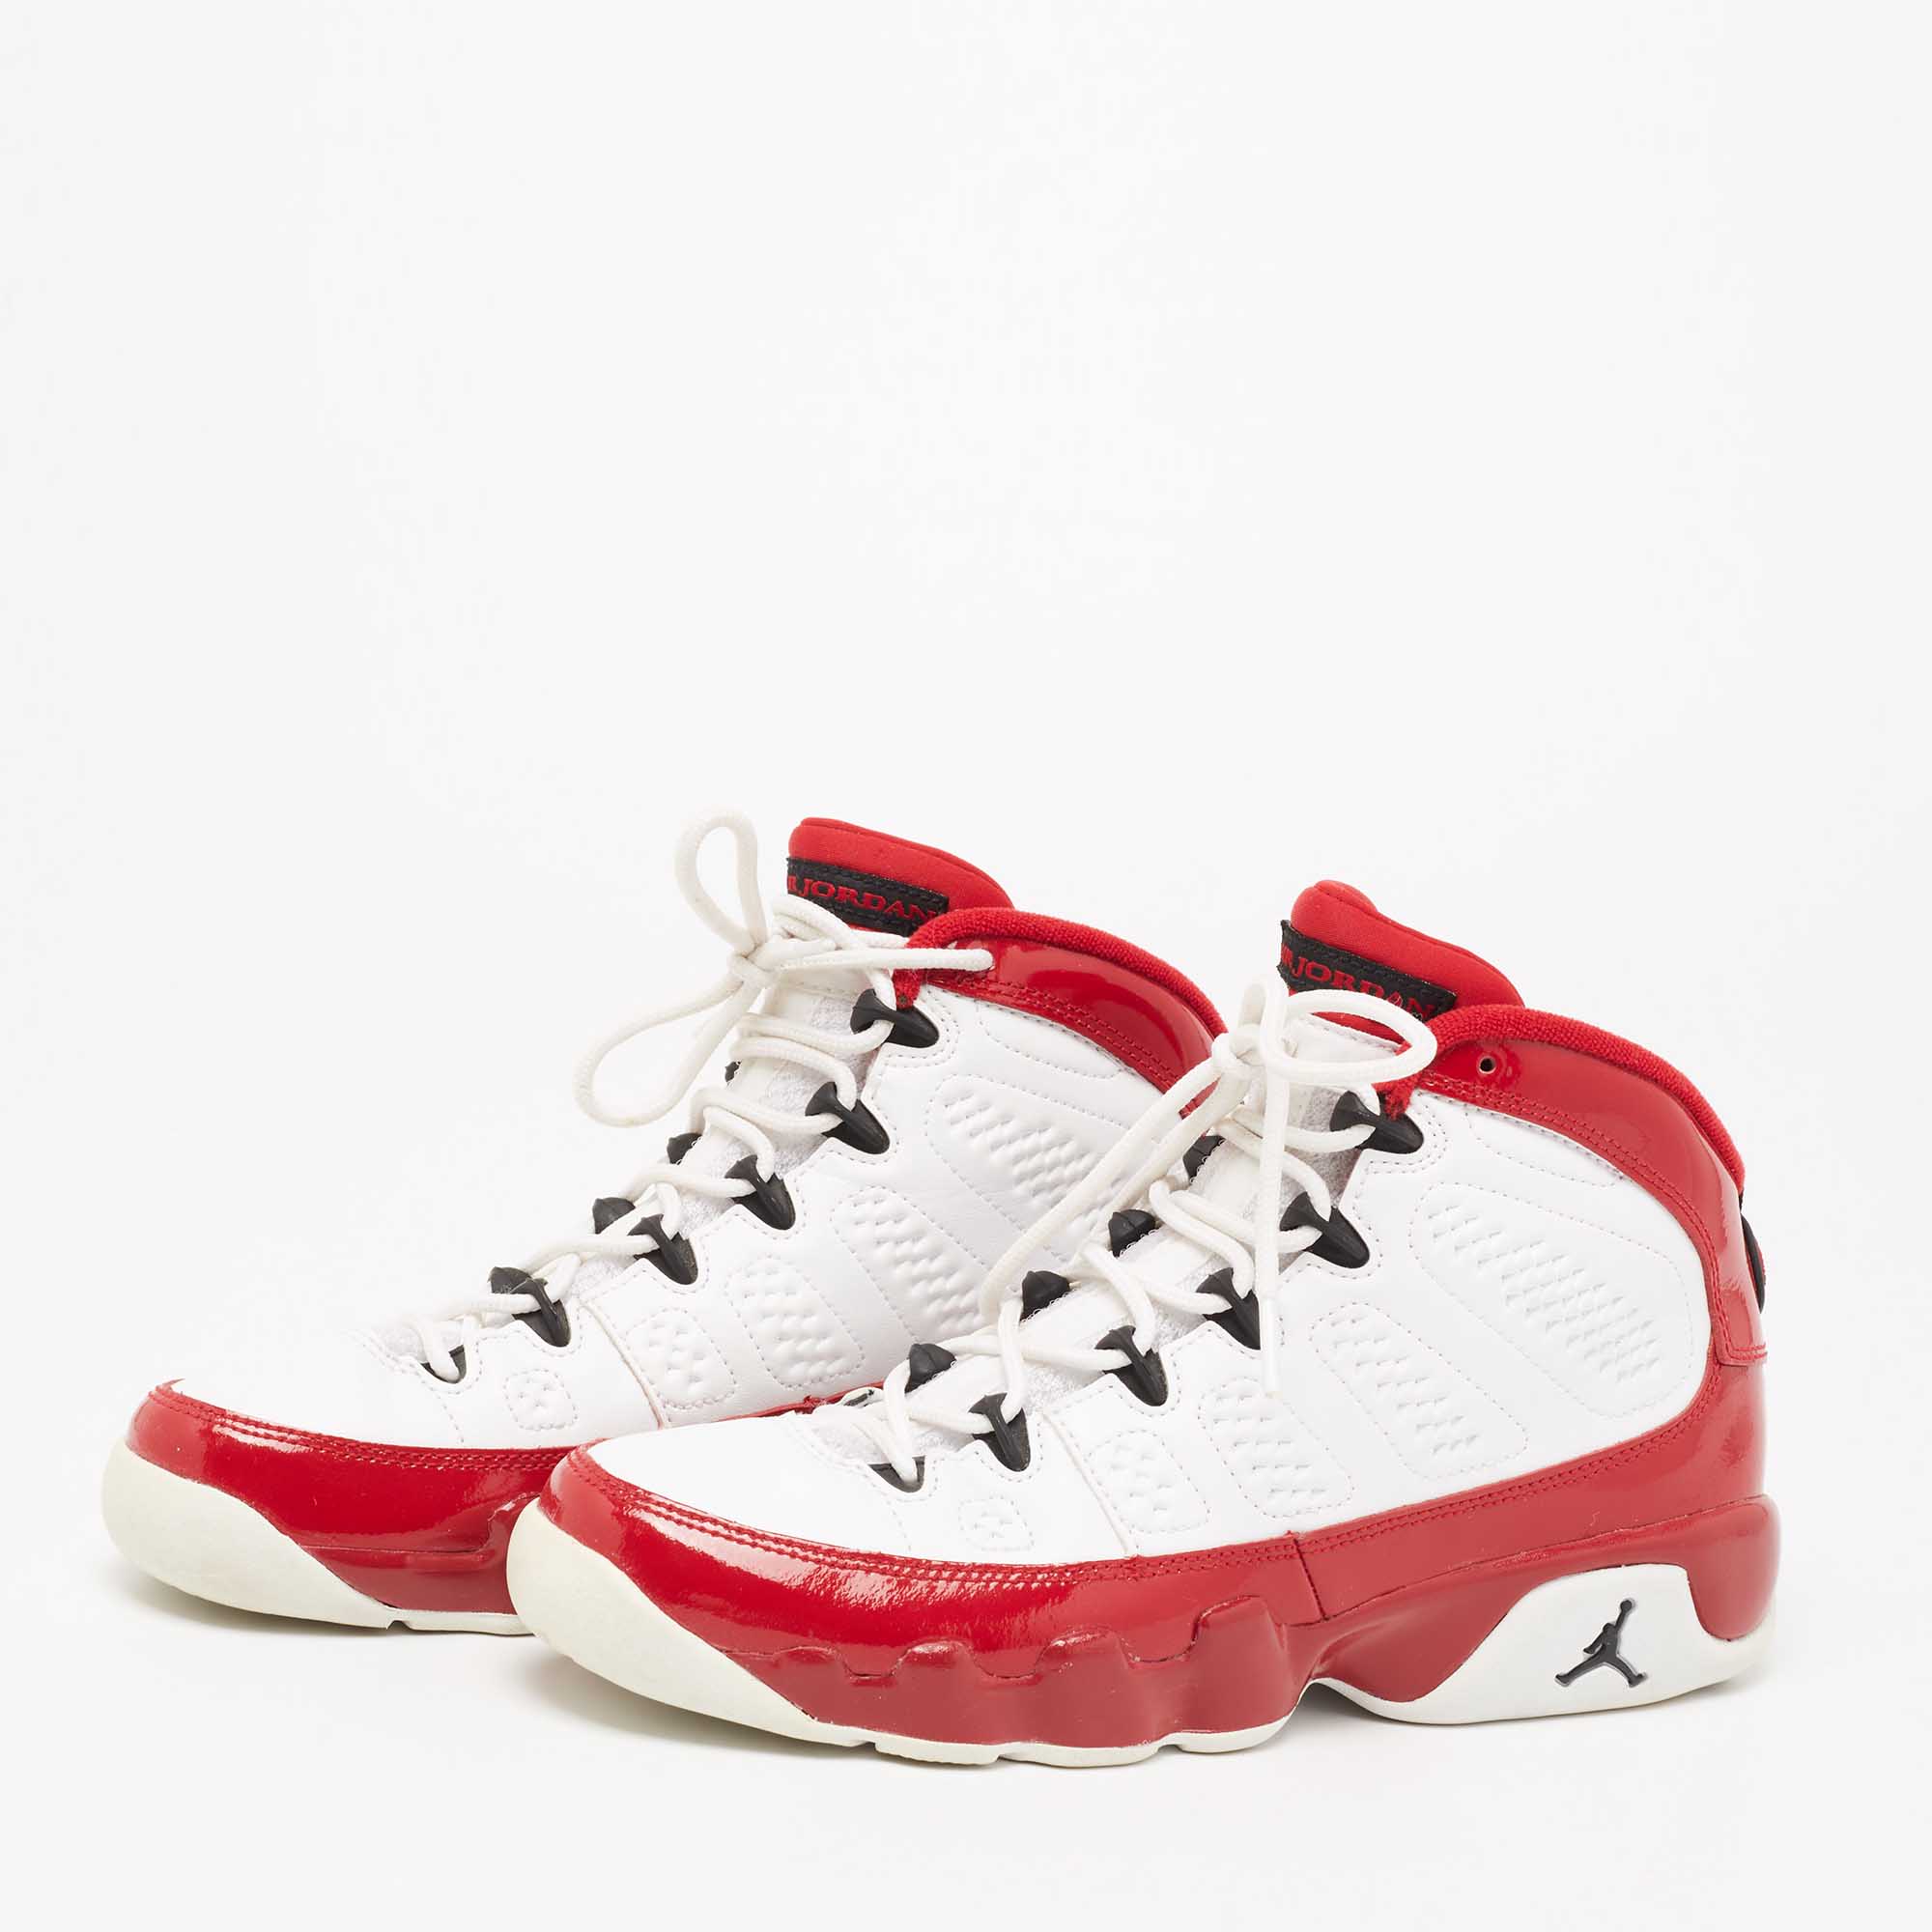 

Air Jordan 9 Gym Red/White Patent and Leather Retro Mid-Top Sneakers Size